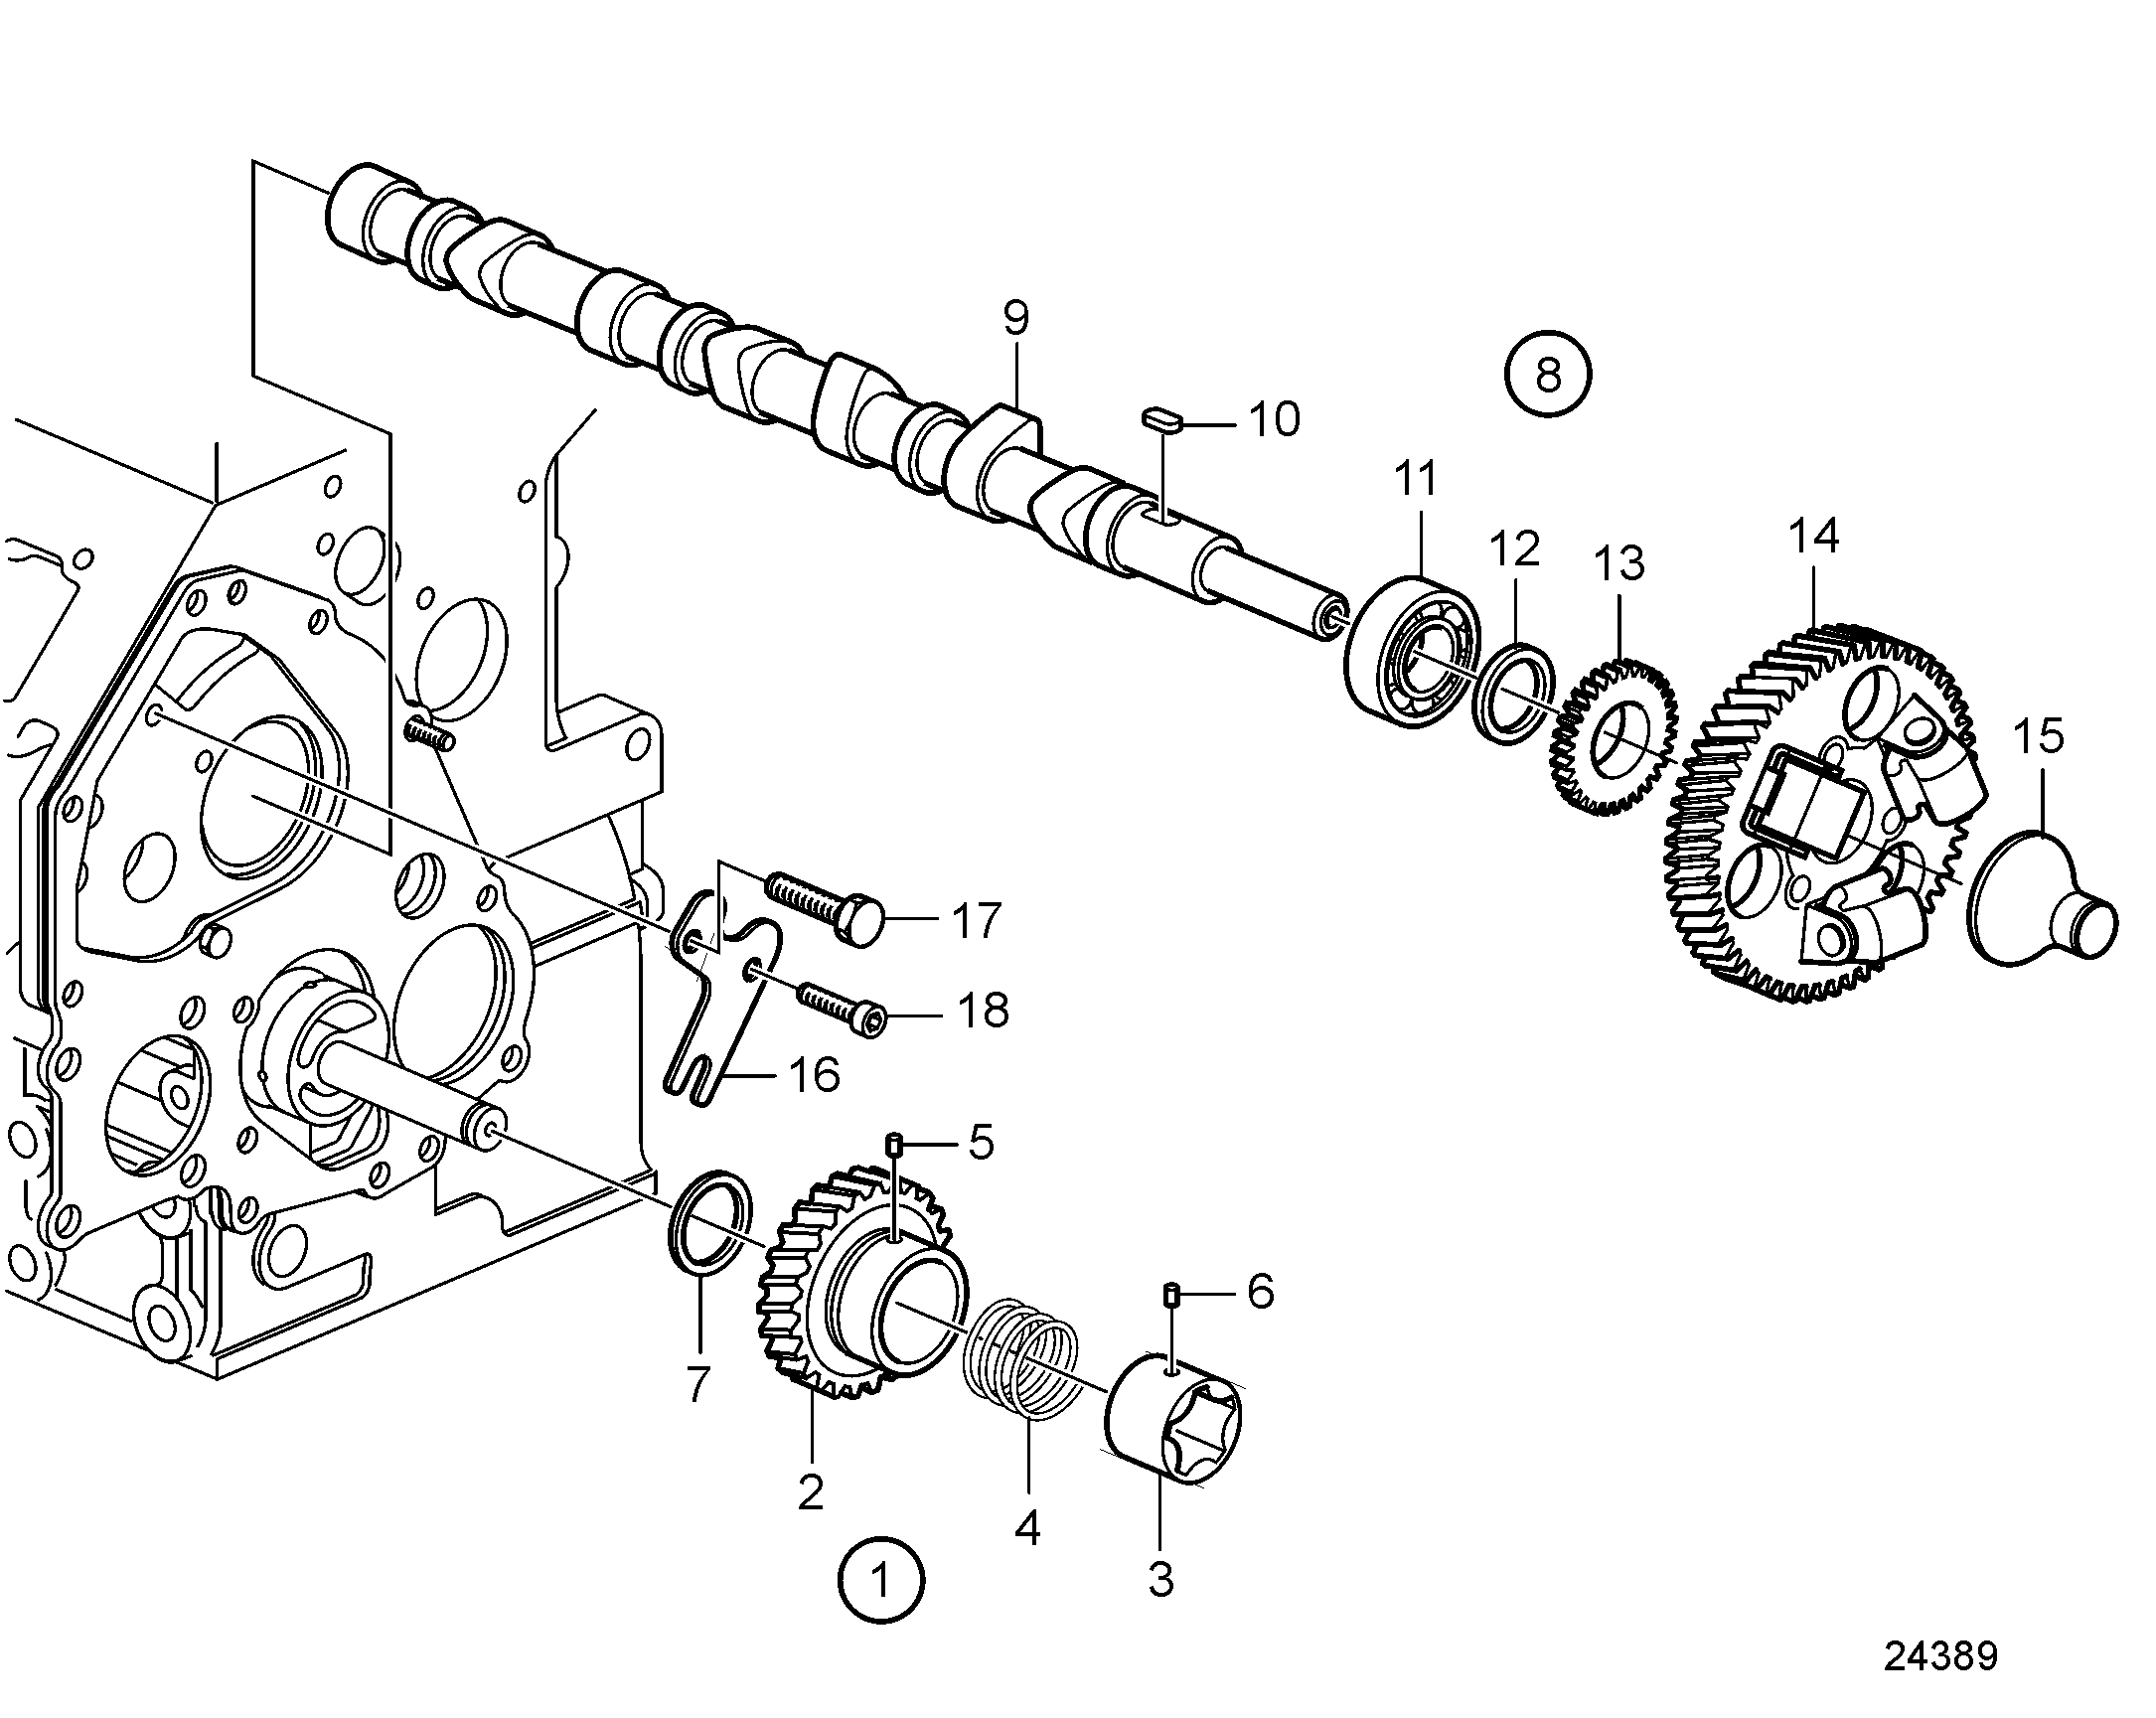 Camshaft and gears